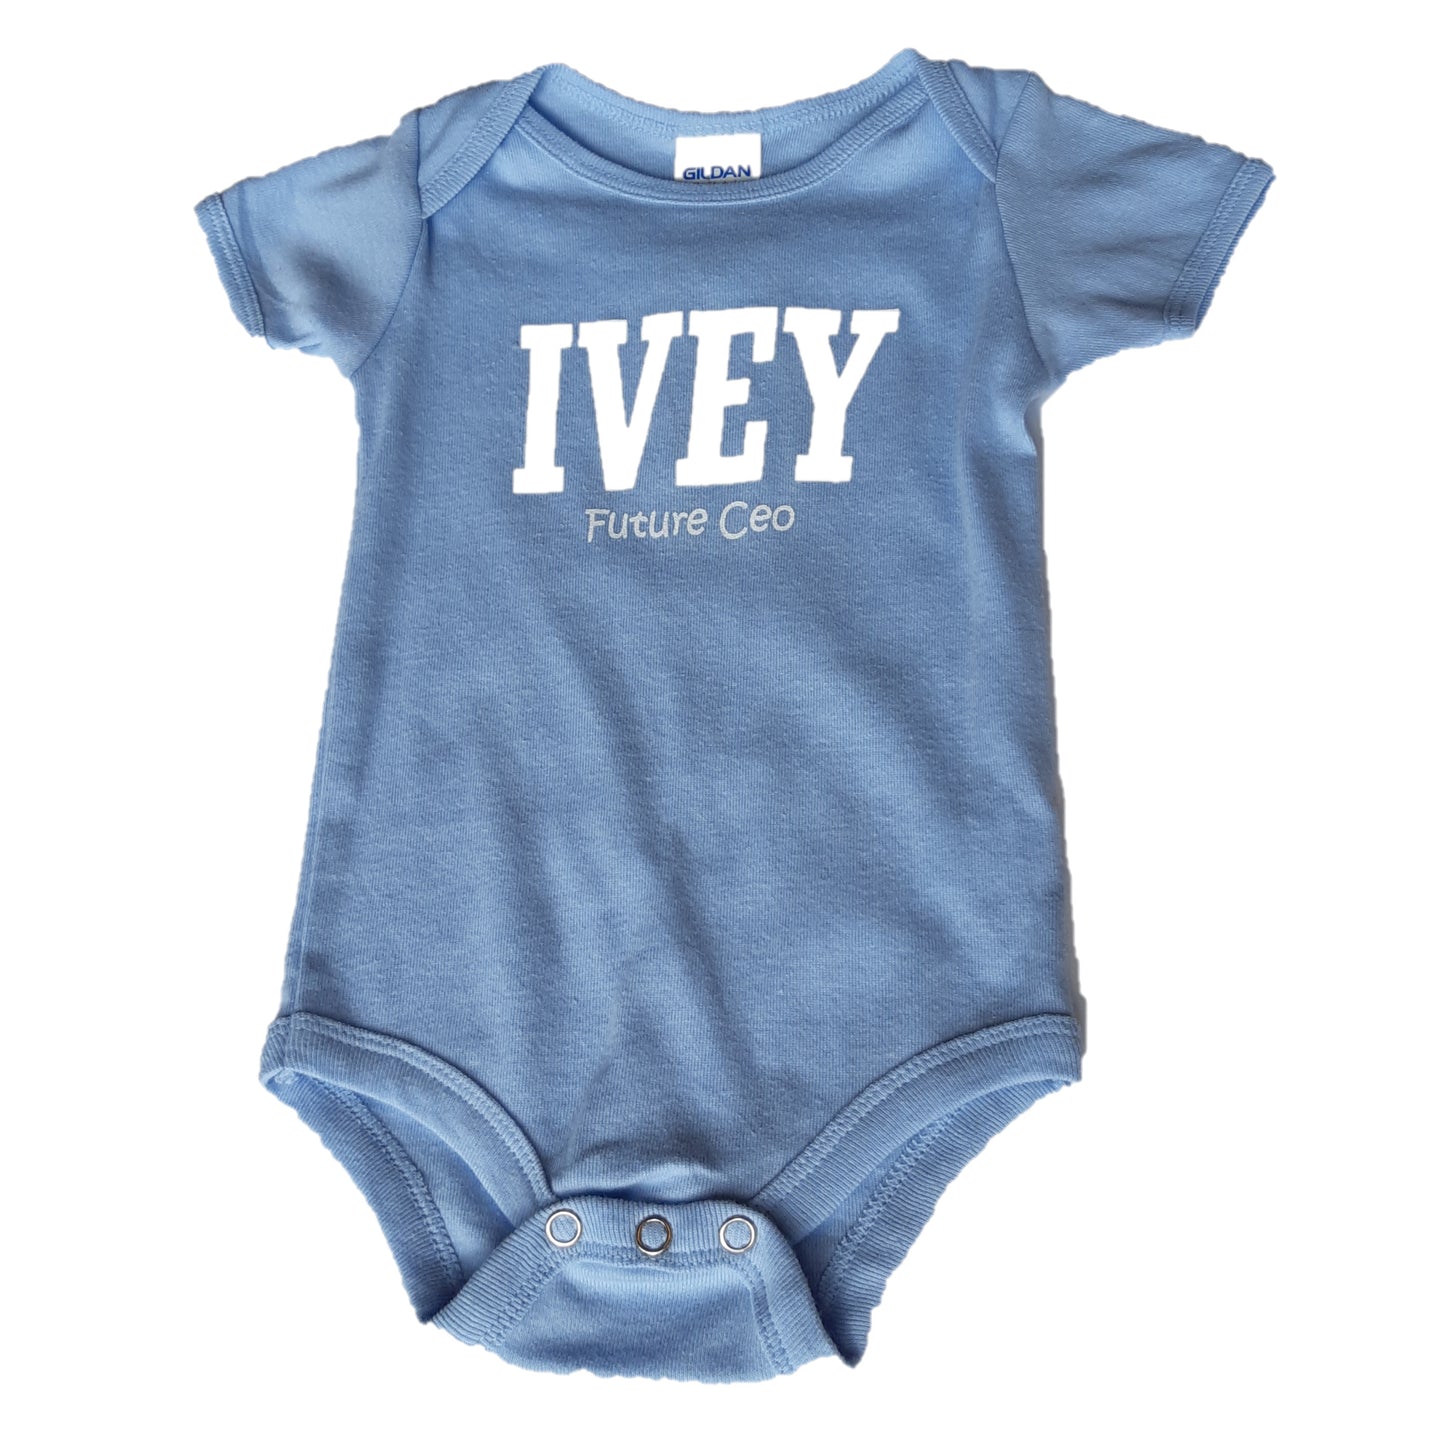 Ivey Baby Onesie - Solid Colour